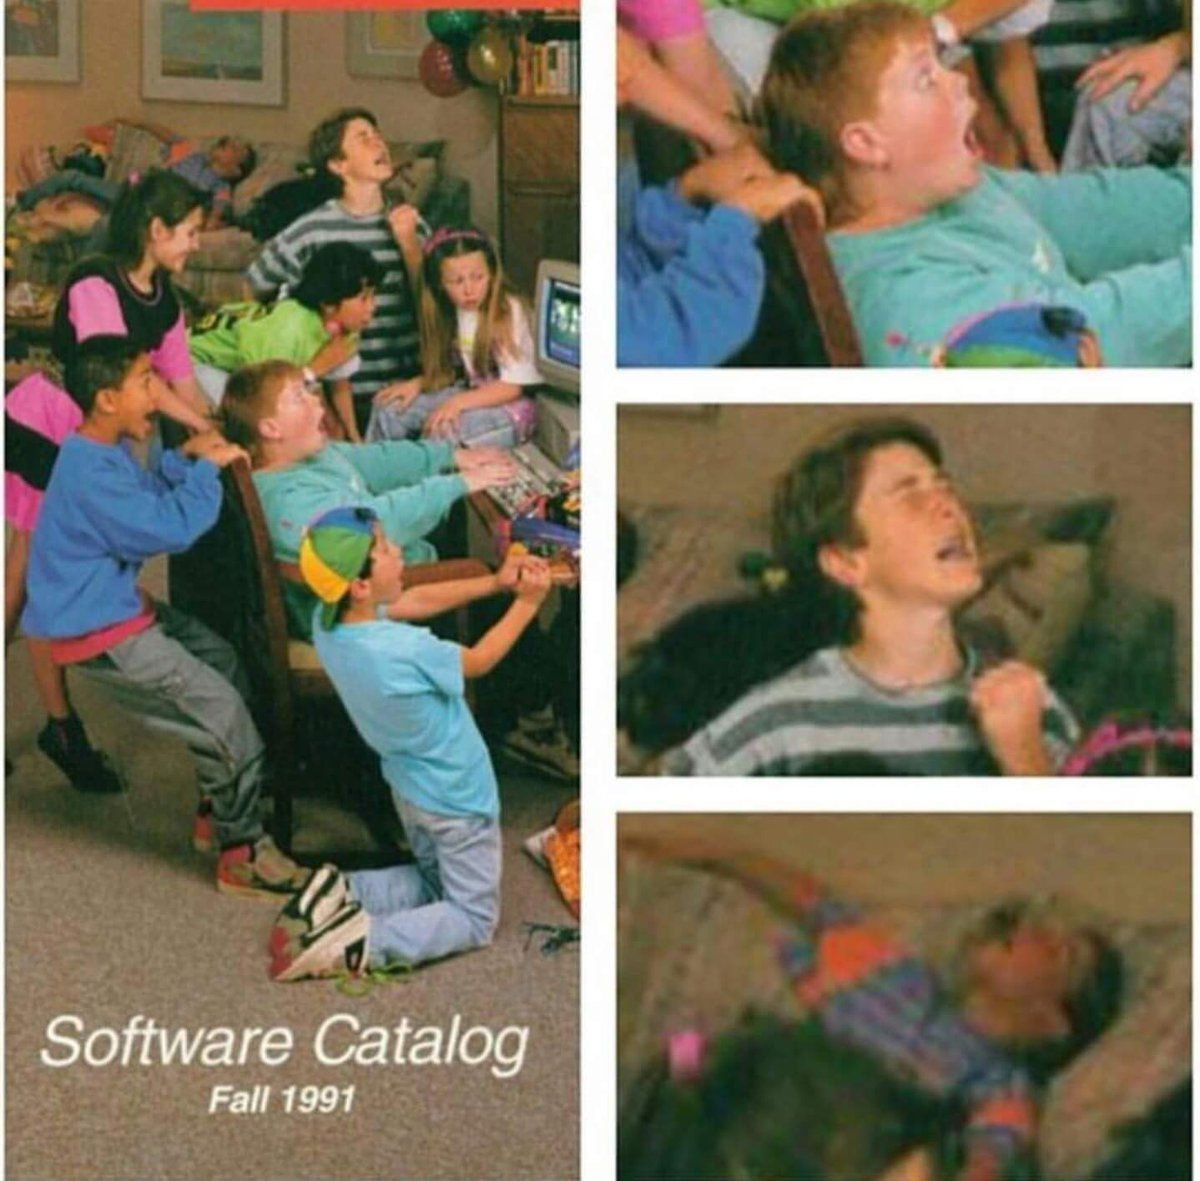 Kids in the 90's playing games on a PC